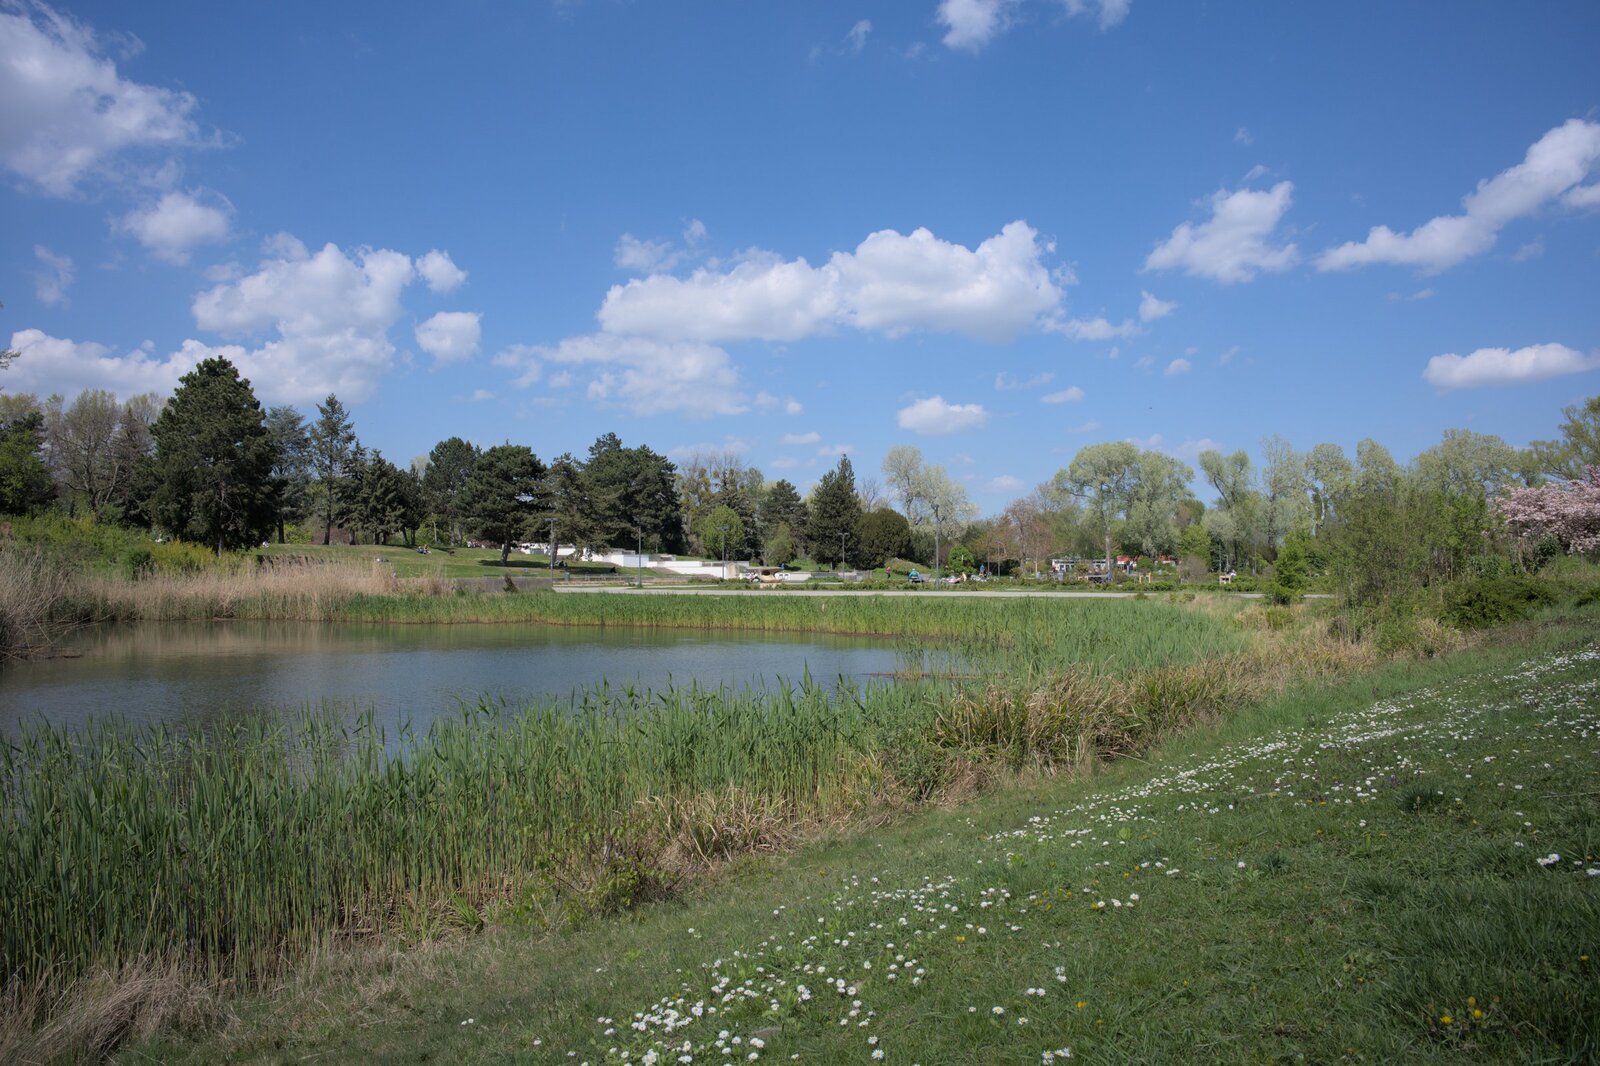 Grass, a small pond and a blue sky with scattert clouds